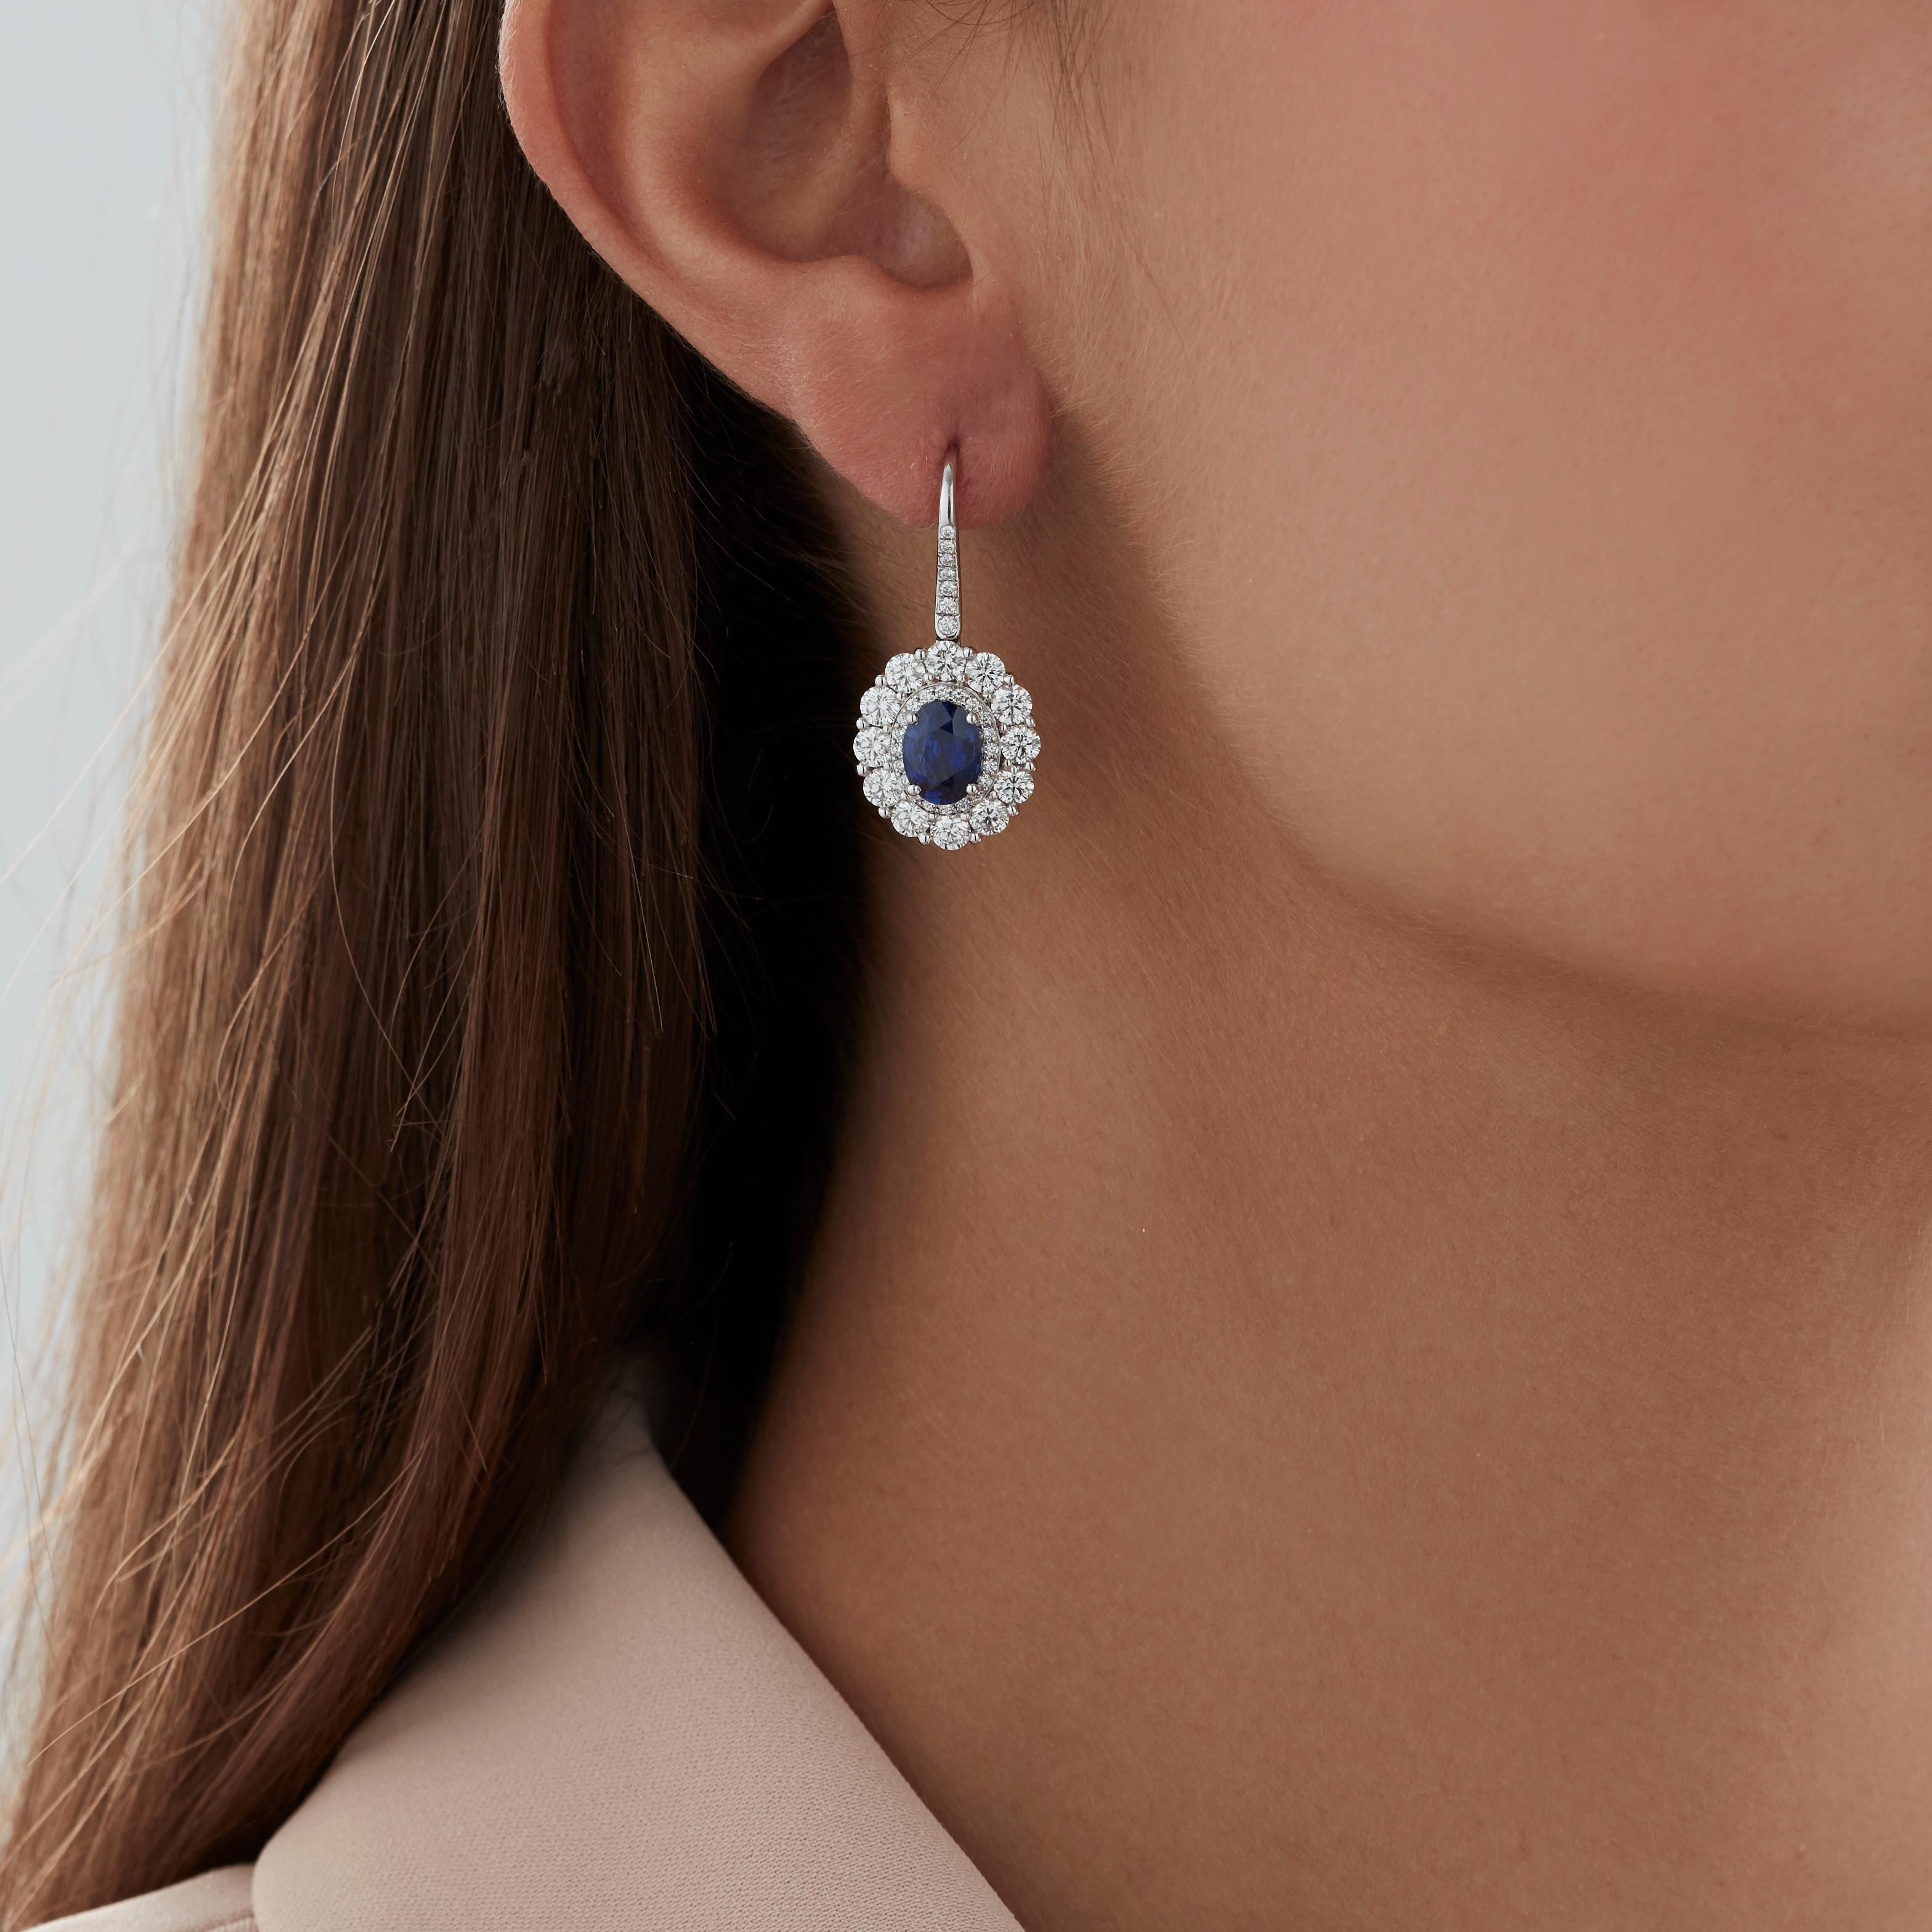 A House of Garrard pair of platinum double cluster drop earrings from the 'Garrard 1735' collection, set with round white diamonds and two central oval blue sapphires.

78 round white diamonds weighing: 2.90cts
1 oval blue sapphire weighing: